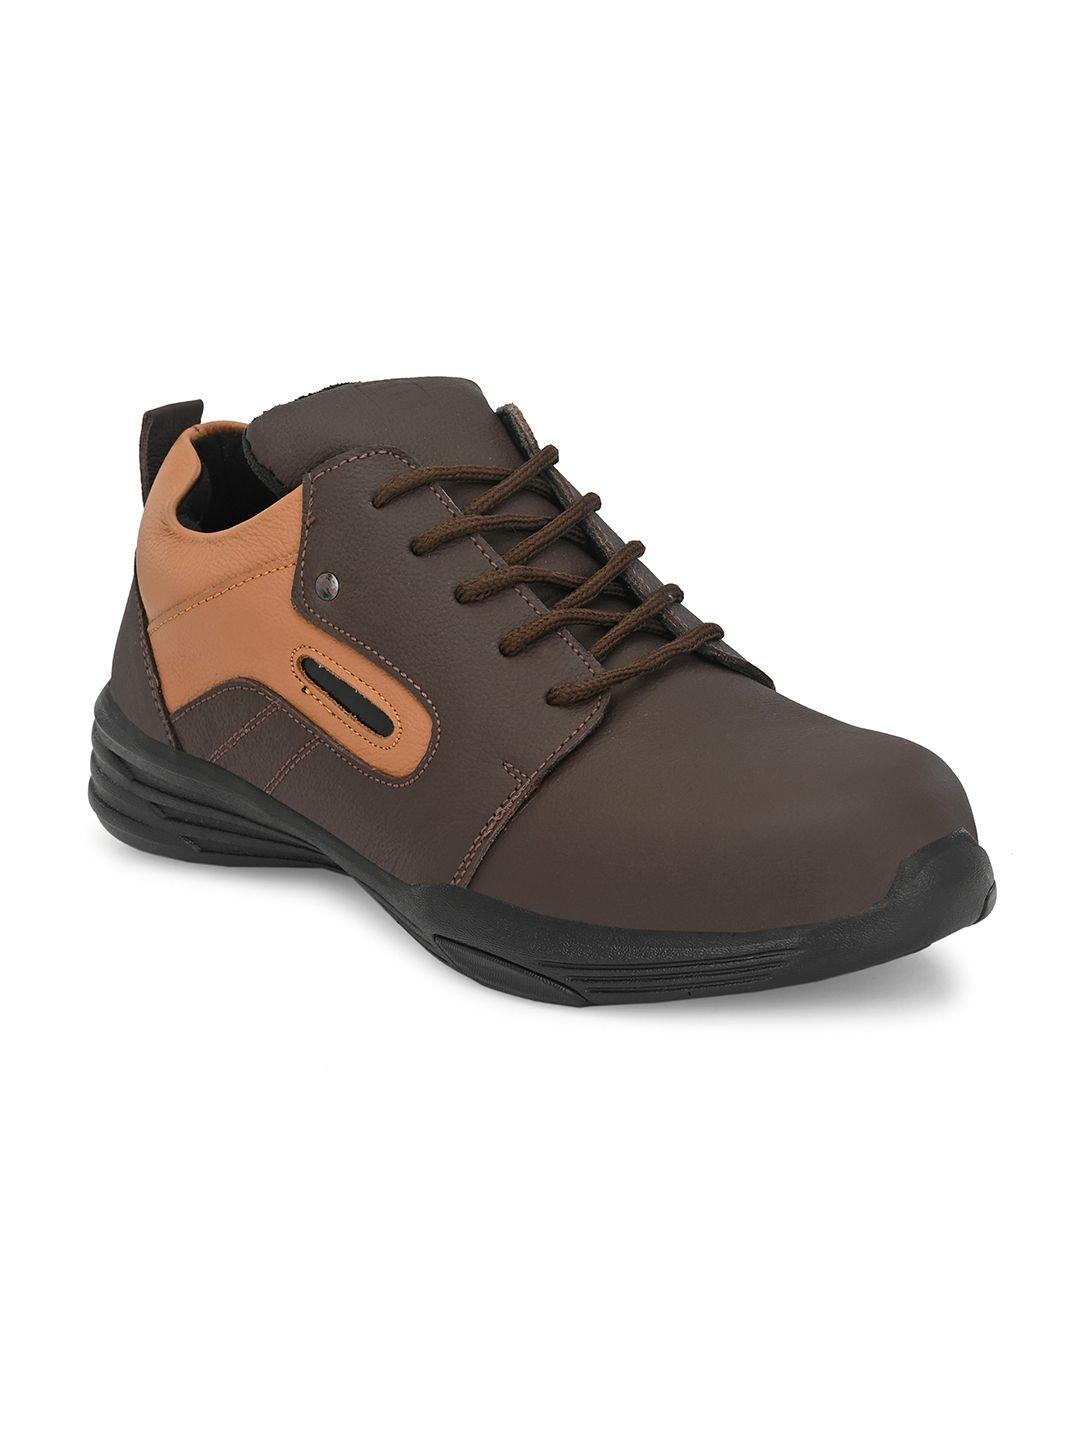 eego italy men leather trekking non-marking shoes